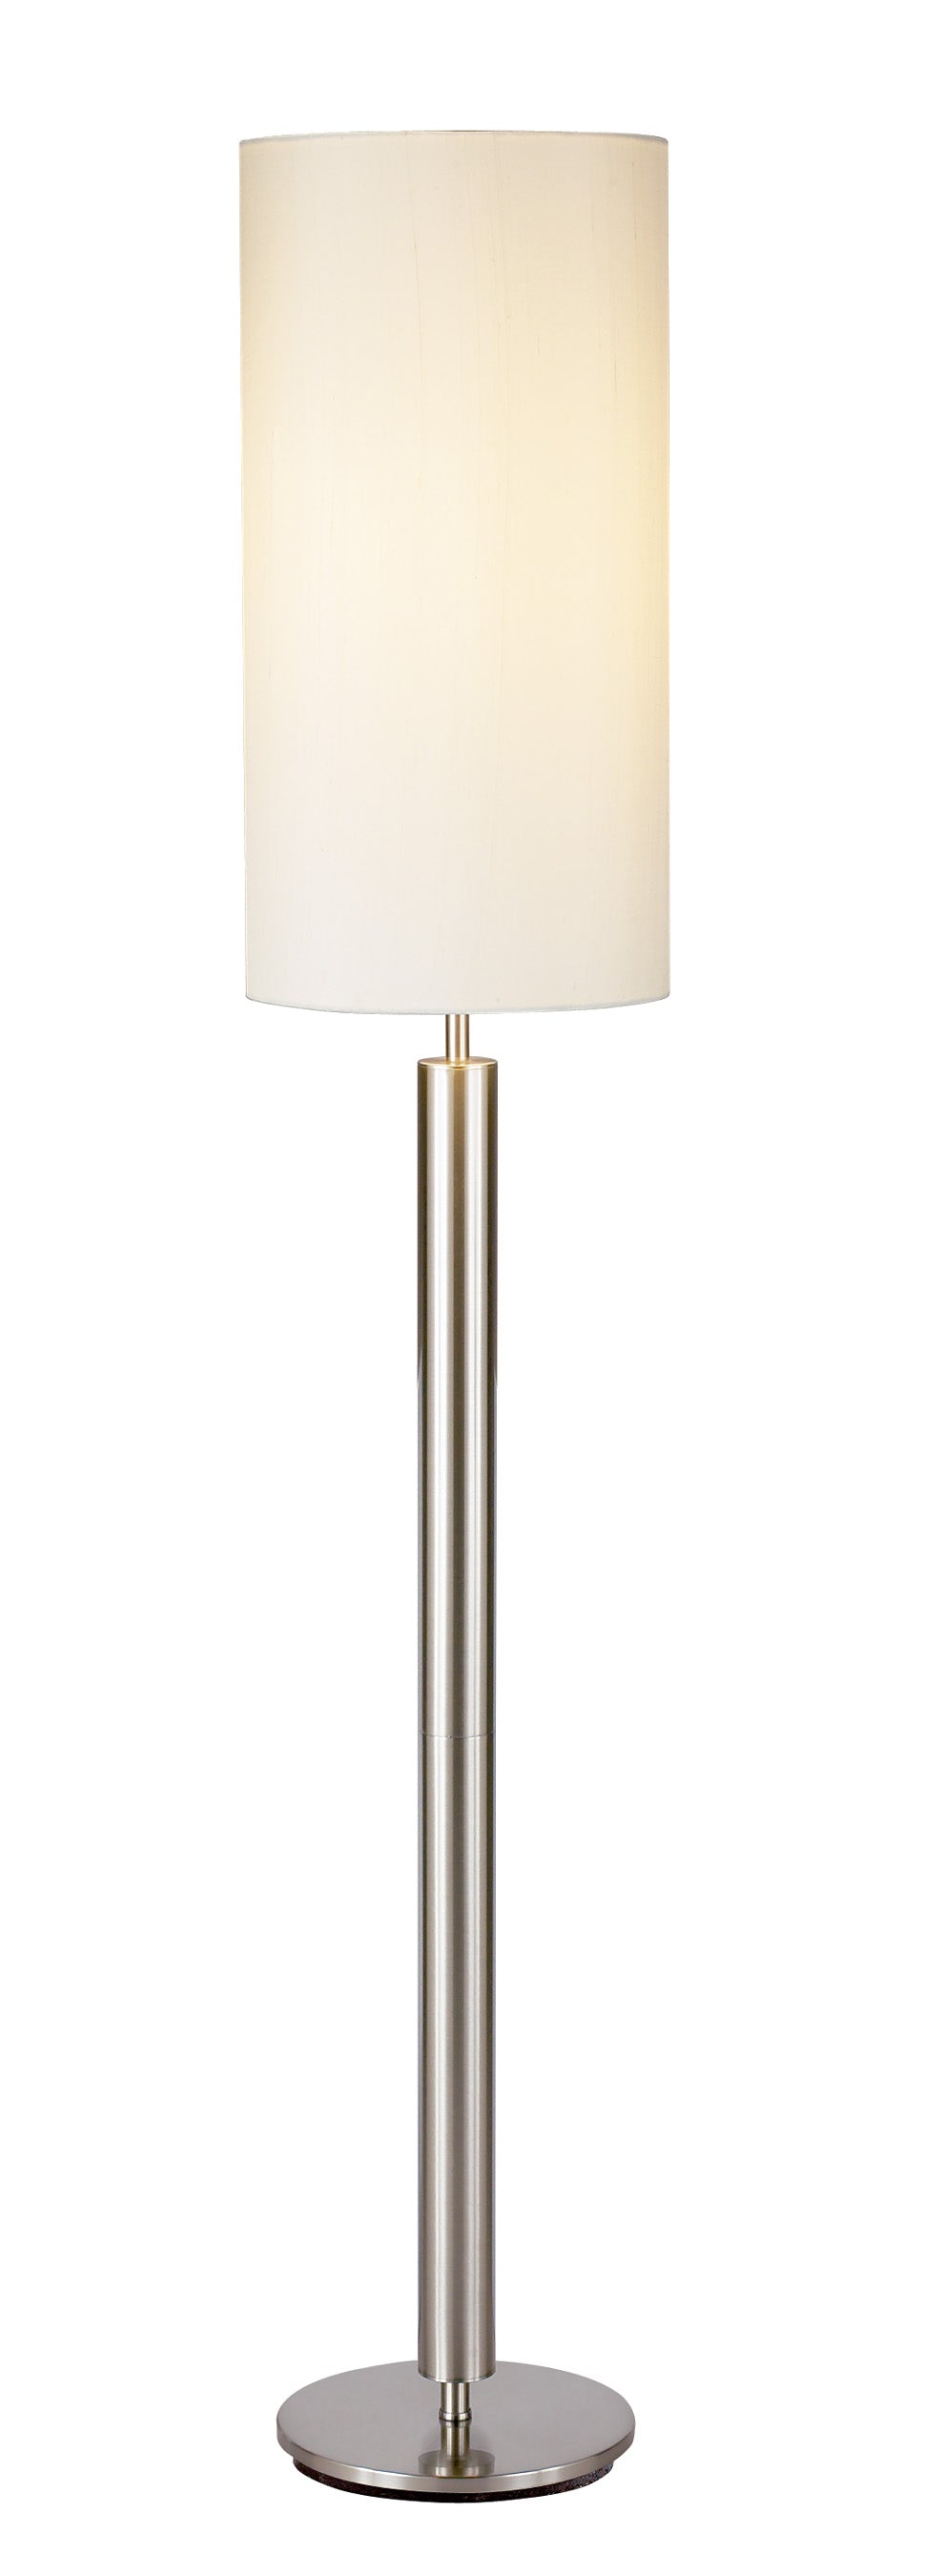 58" Traditional Shaped Floor Lamp With White Drum Shade